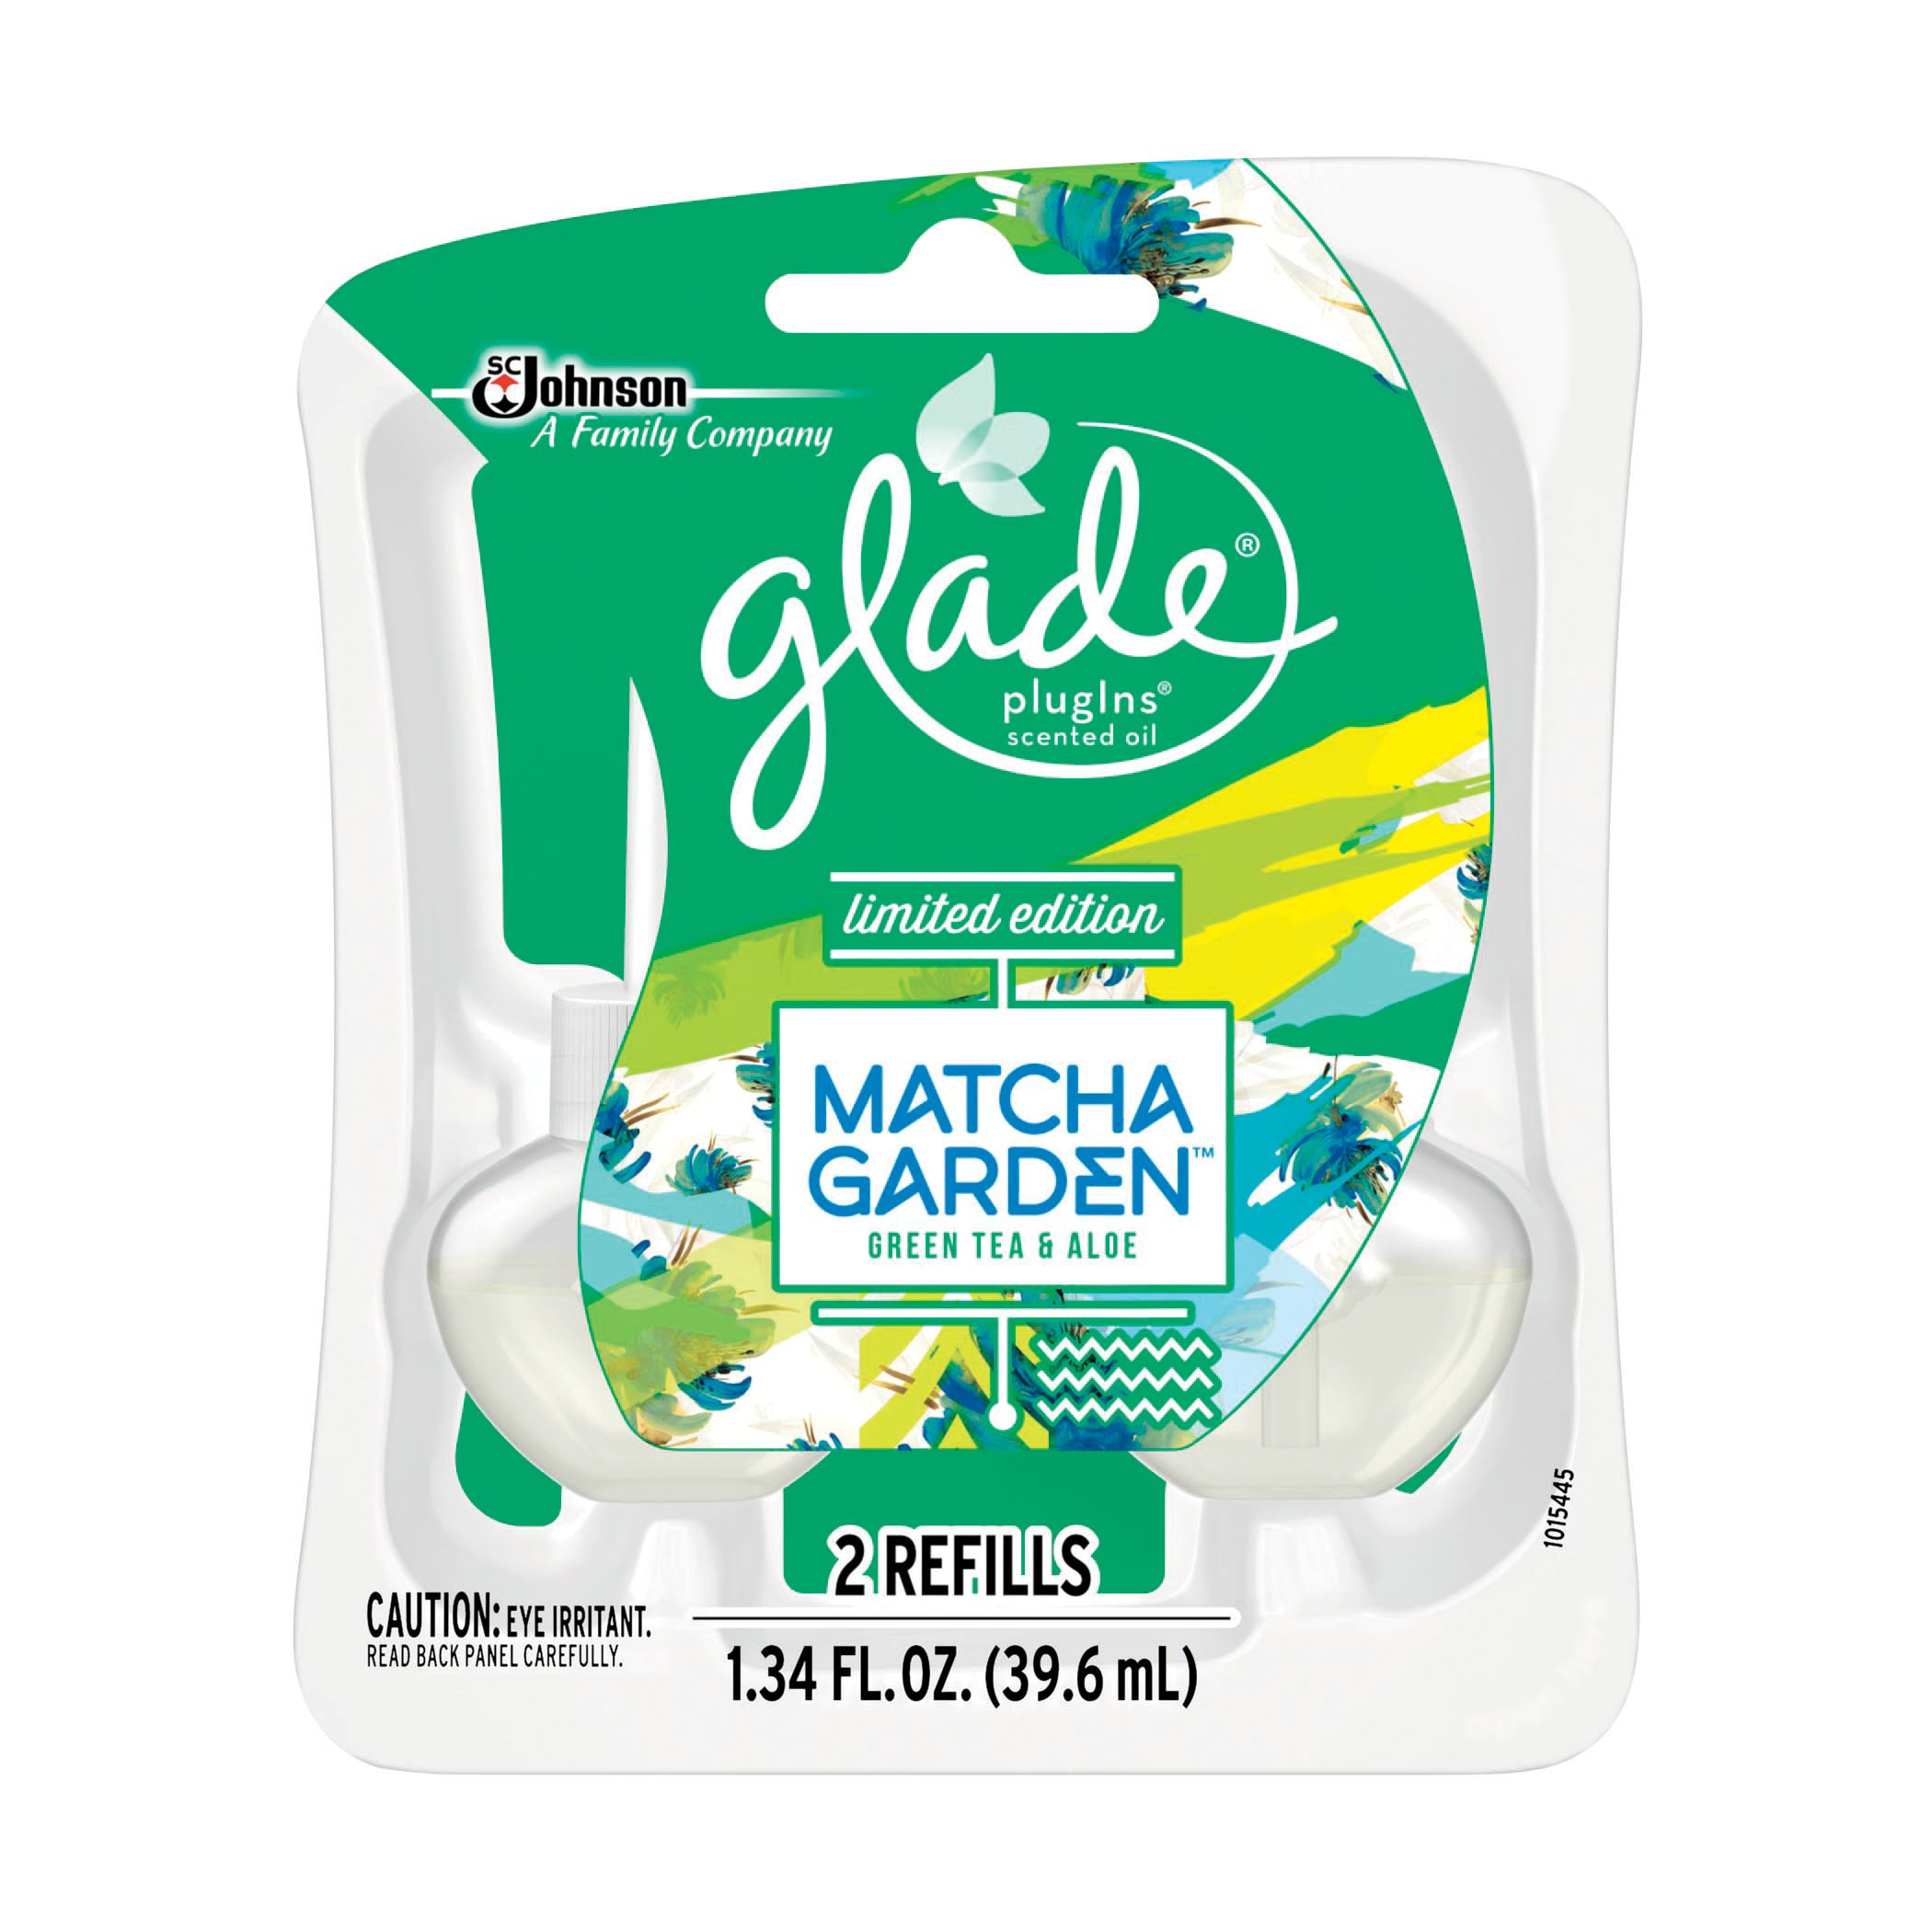 Glade Plugins Scented Oil Matcha Garden 2 Count